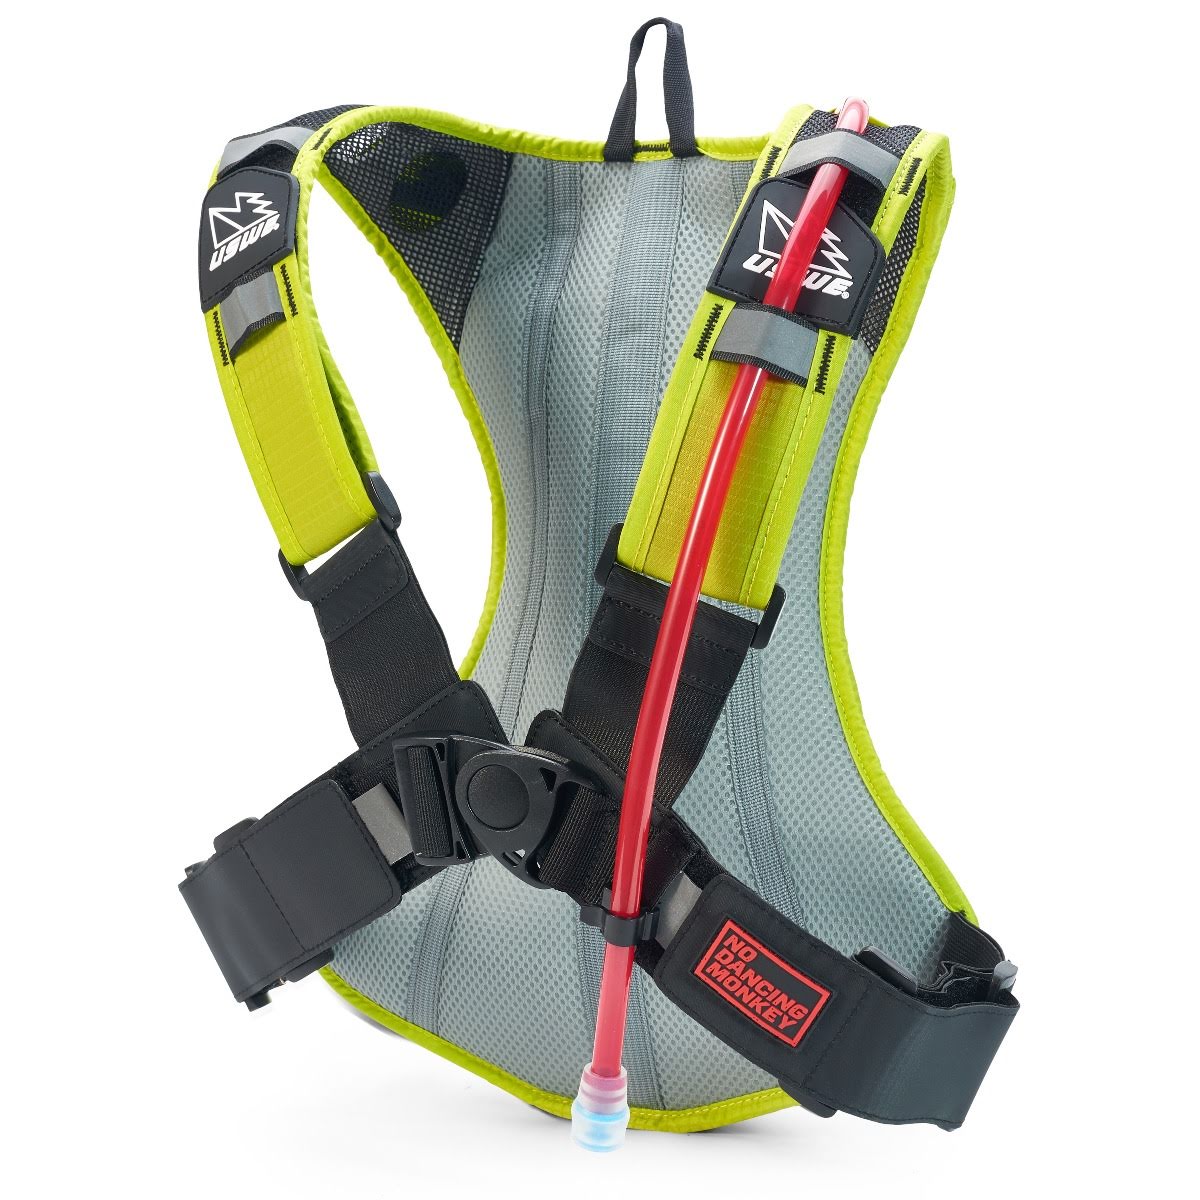 USWE Outlander 4 Hydration Backpack Crazy Yellow – With 3 Litre Bladder